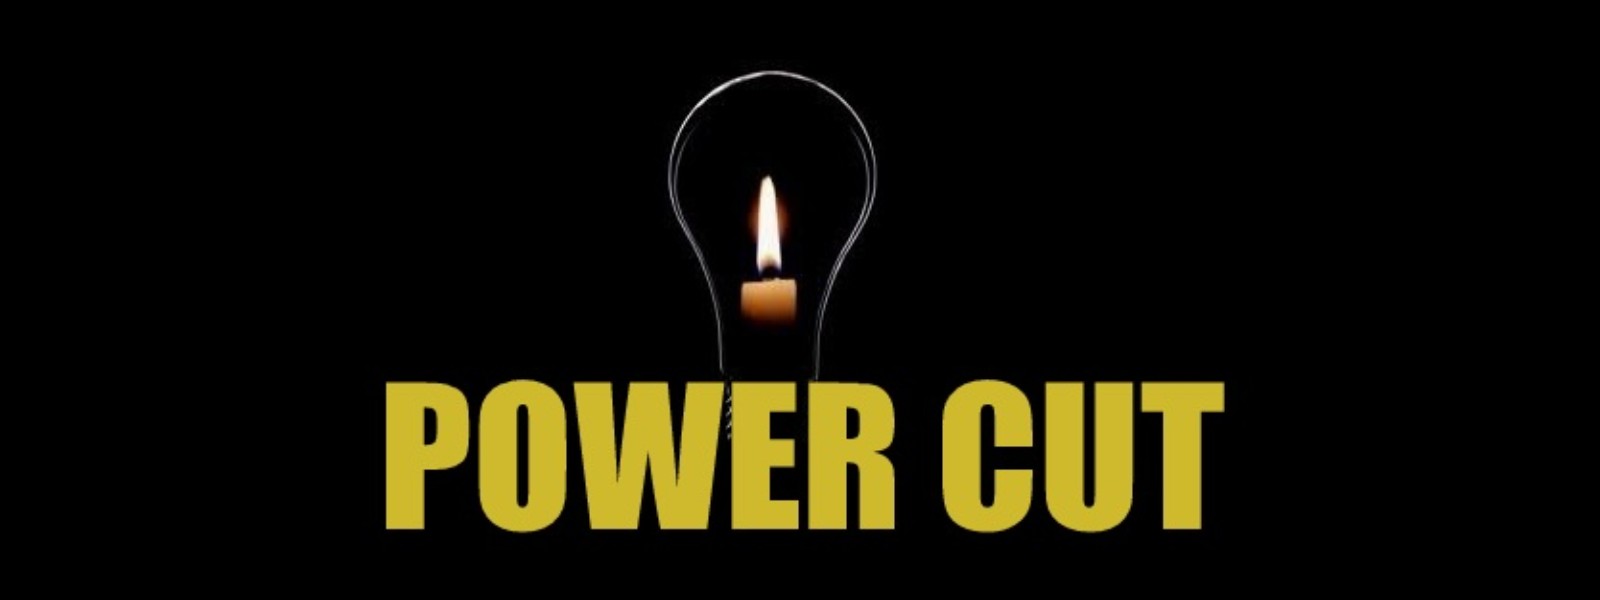 Power cuts approved for 6th & 7th October